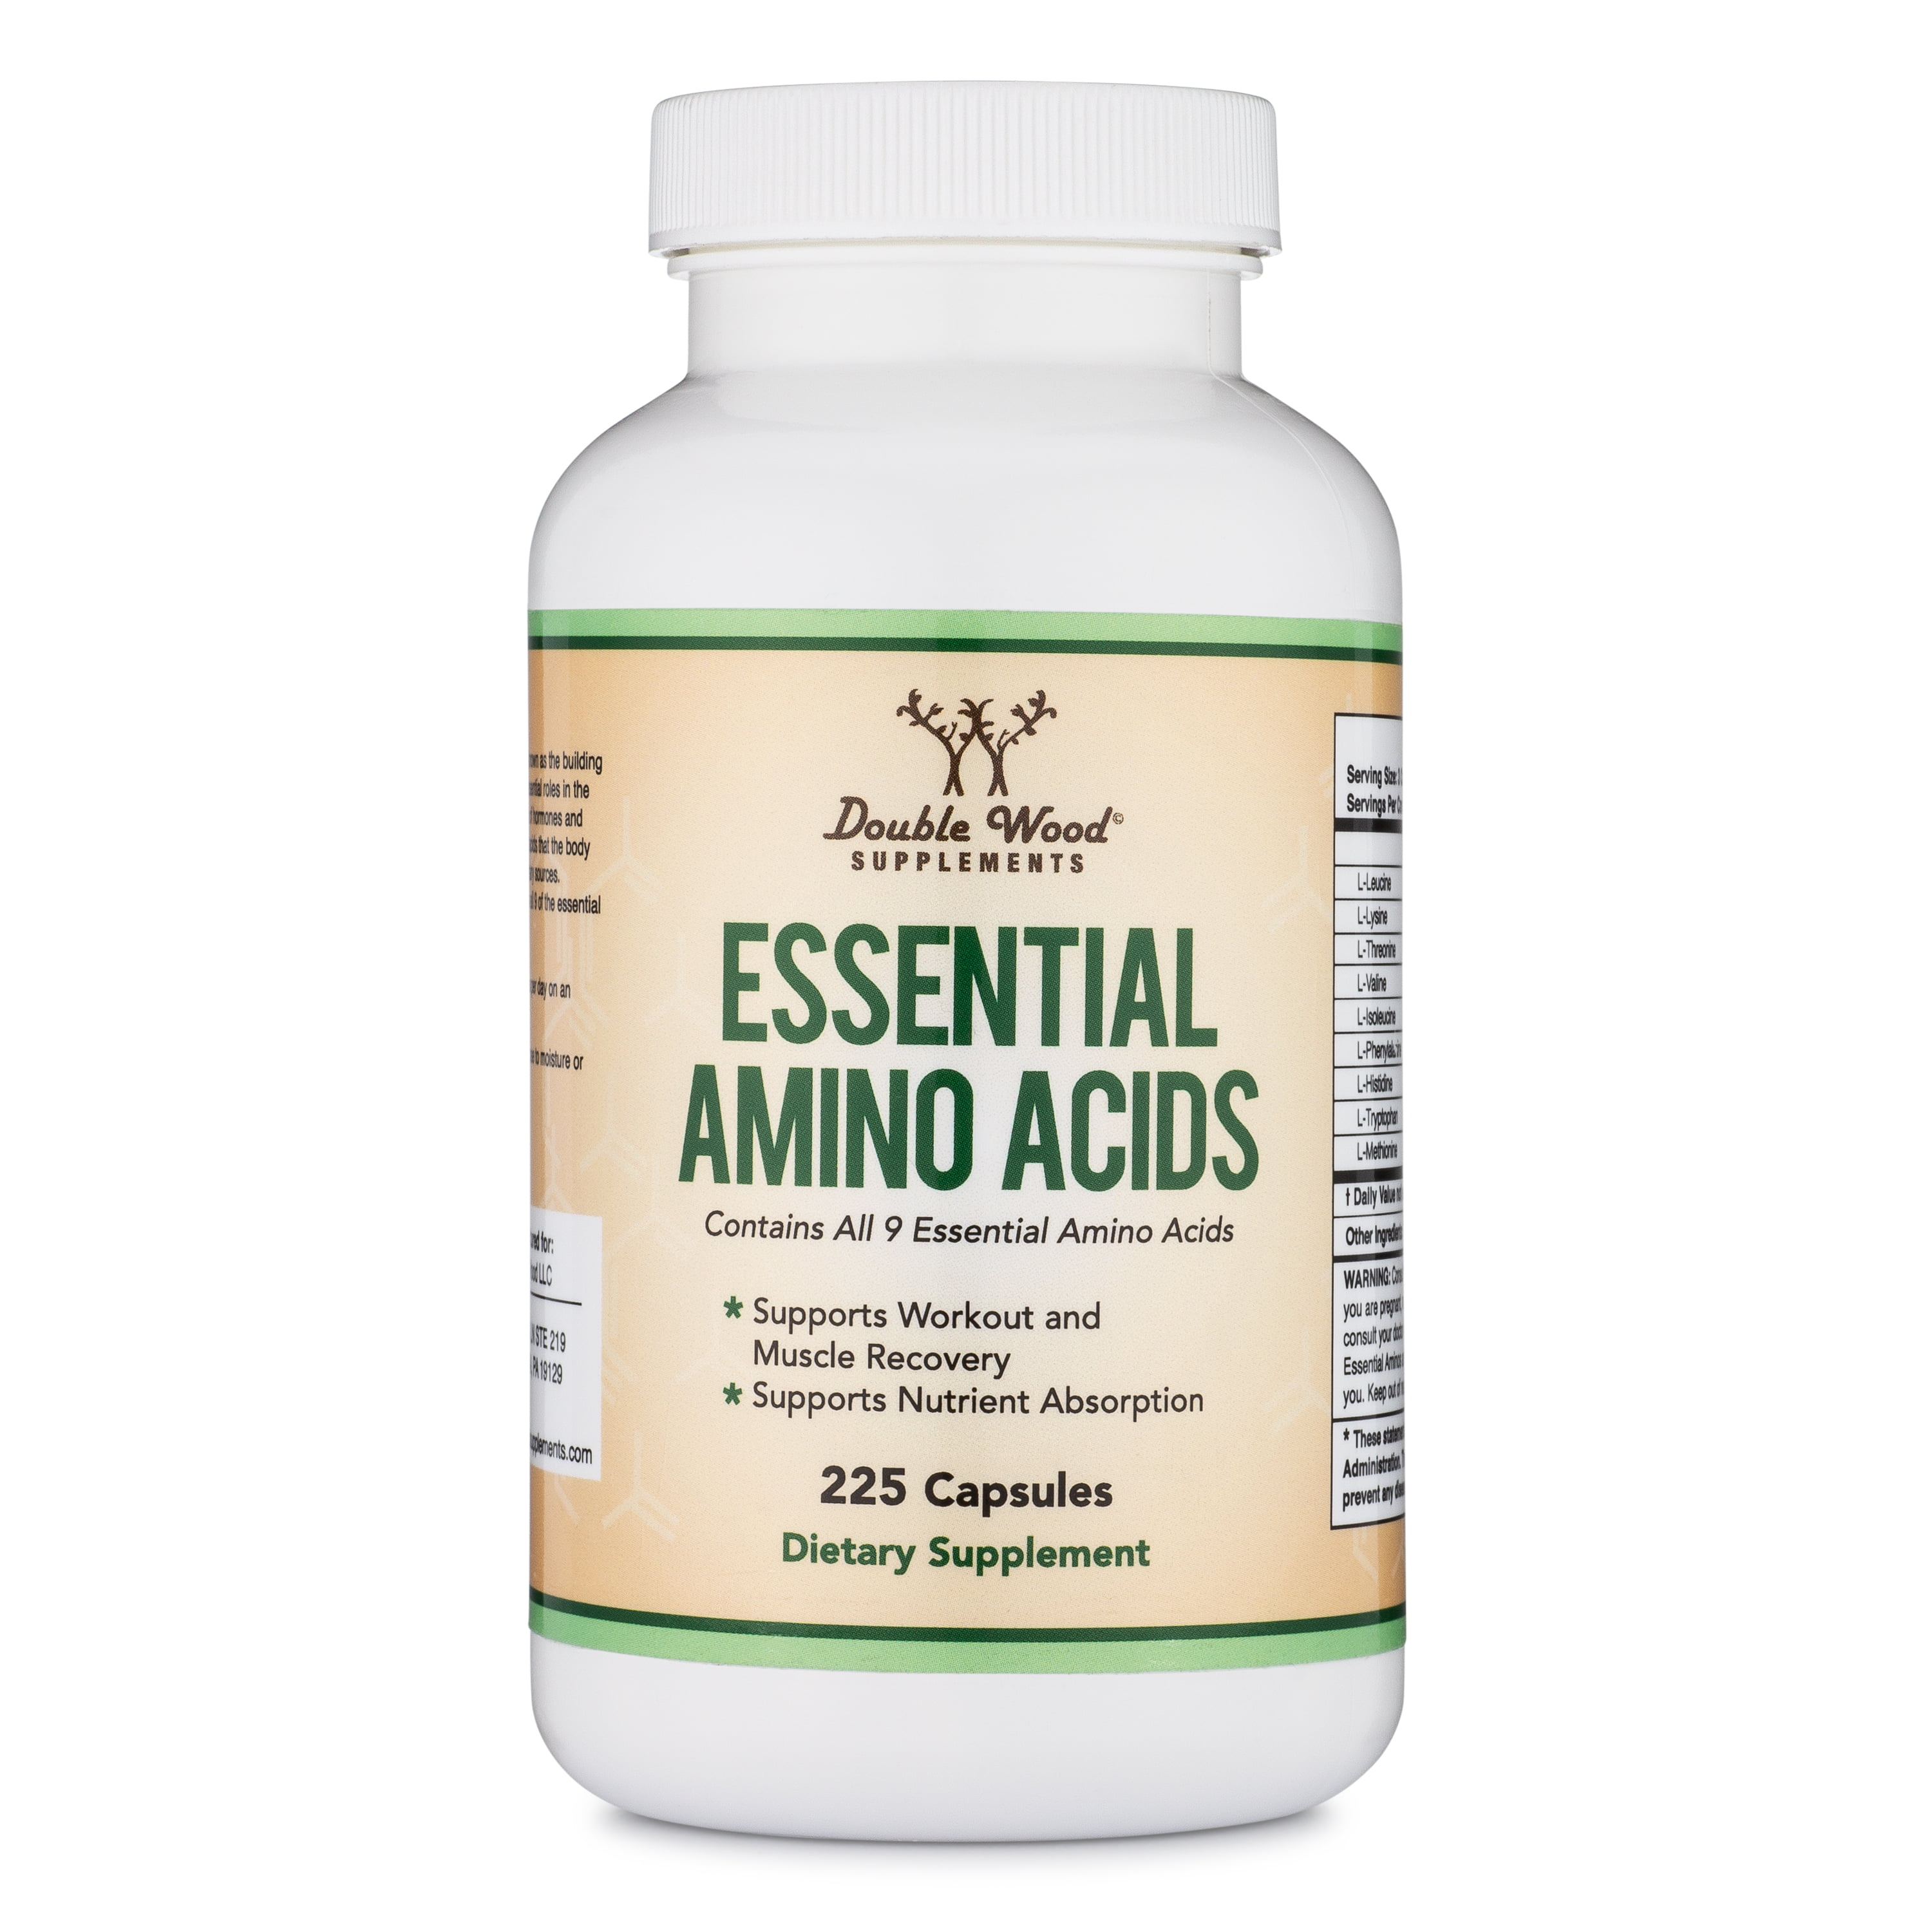 Essential Amino Acids - 1 Gram Per Serving Powder Blend of All 9 Essential Aminos (EAA) and all Branched-Chain Aminos (BCAAs) (Leucine, Isoleucine, Valine) 225 Capsules by Double Wood Supplements